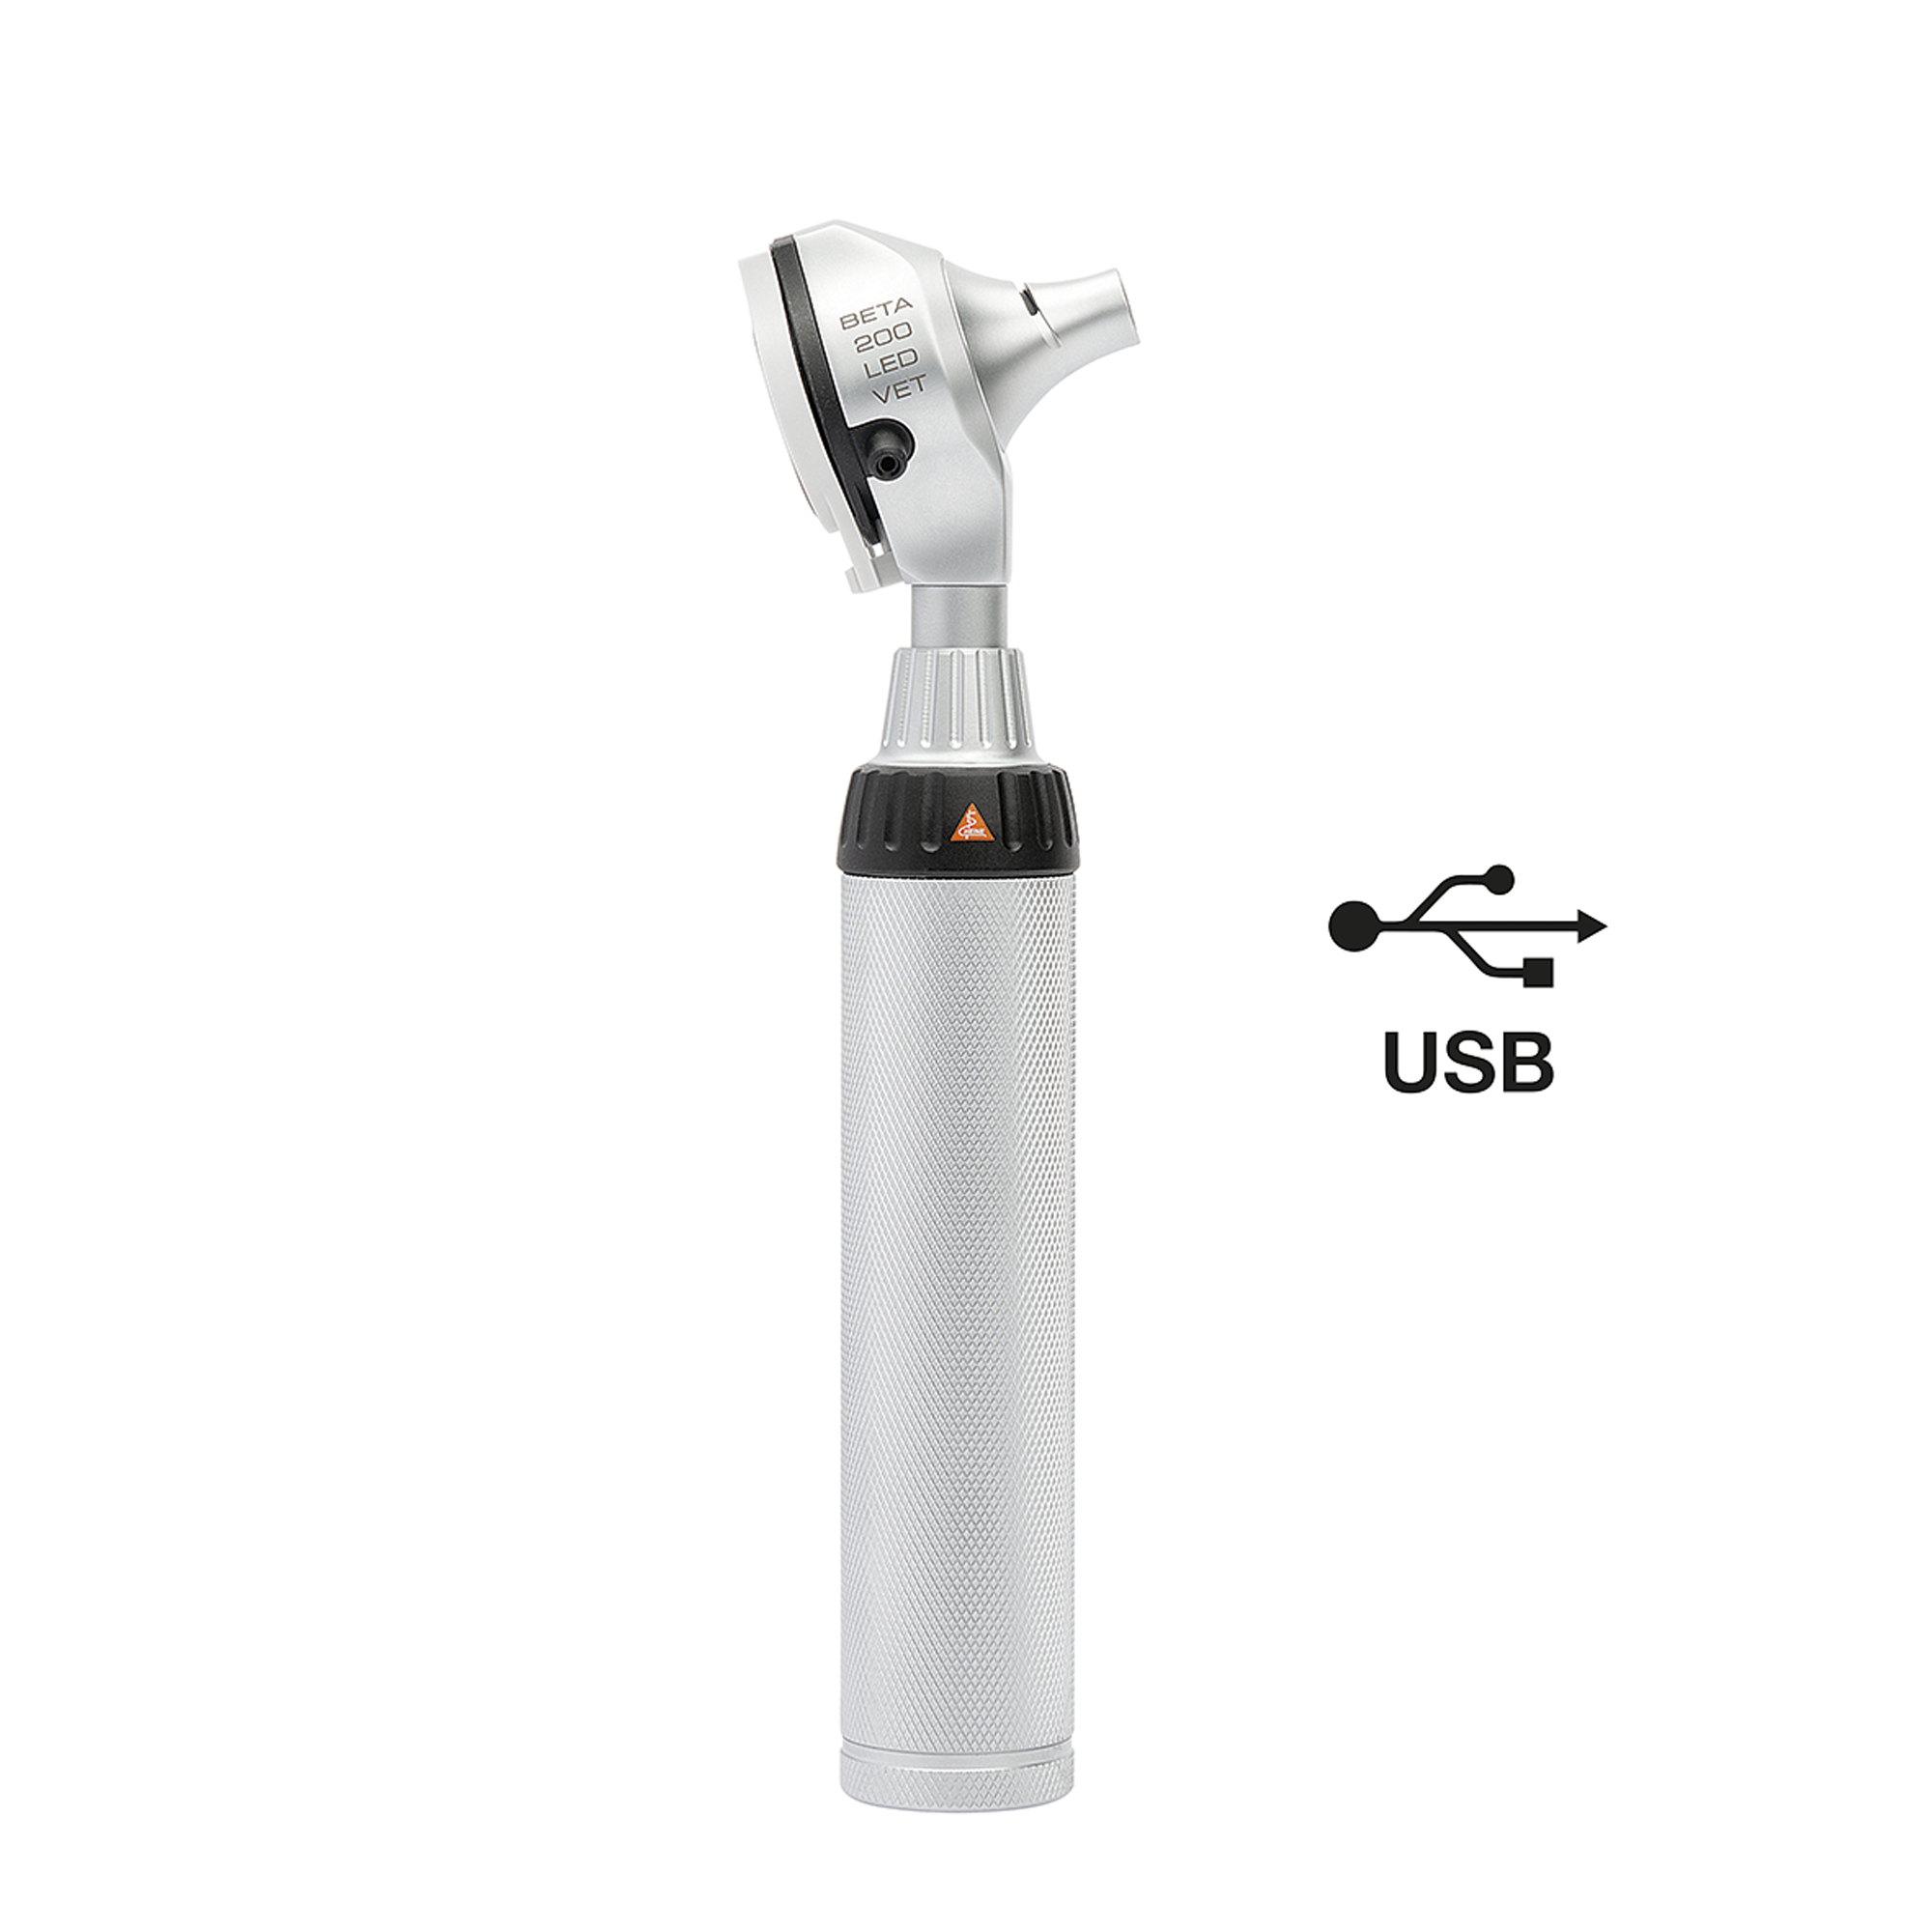 HEINE BETA 200 VET F.O. Otoscope in LED, BETA4 USB rechargeable handle and USB sign